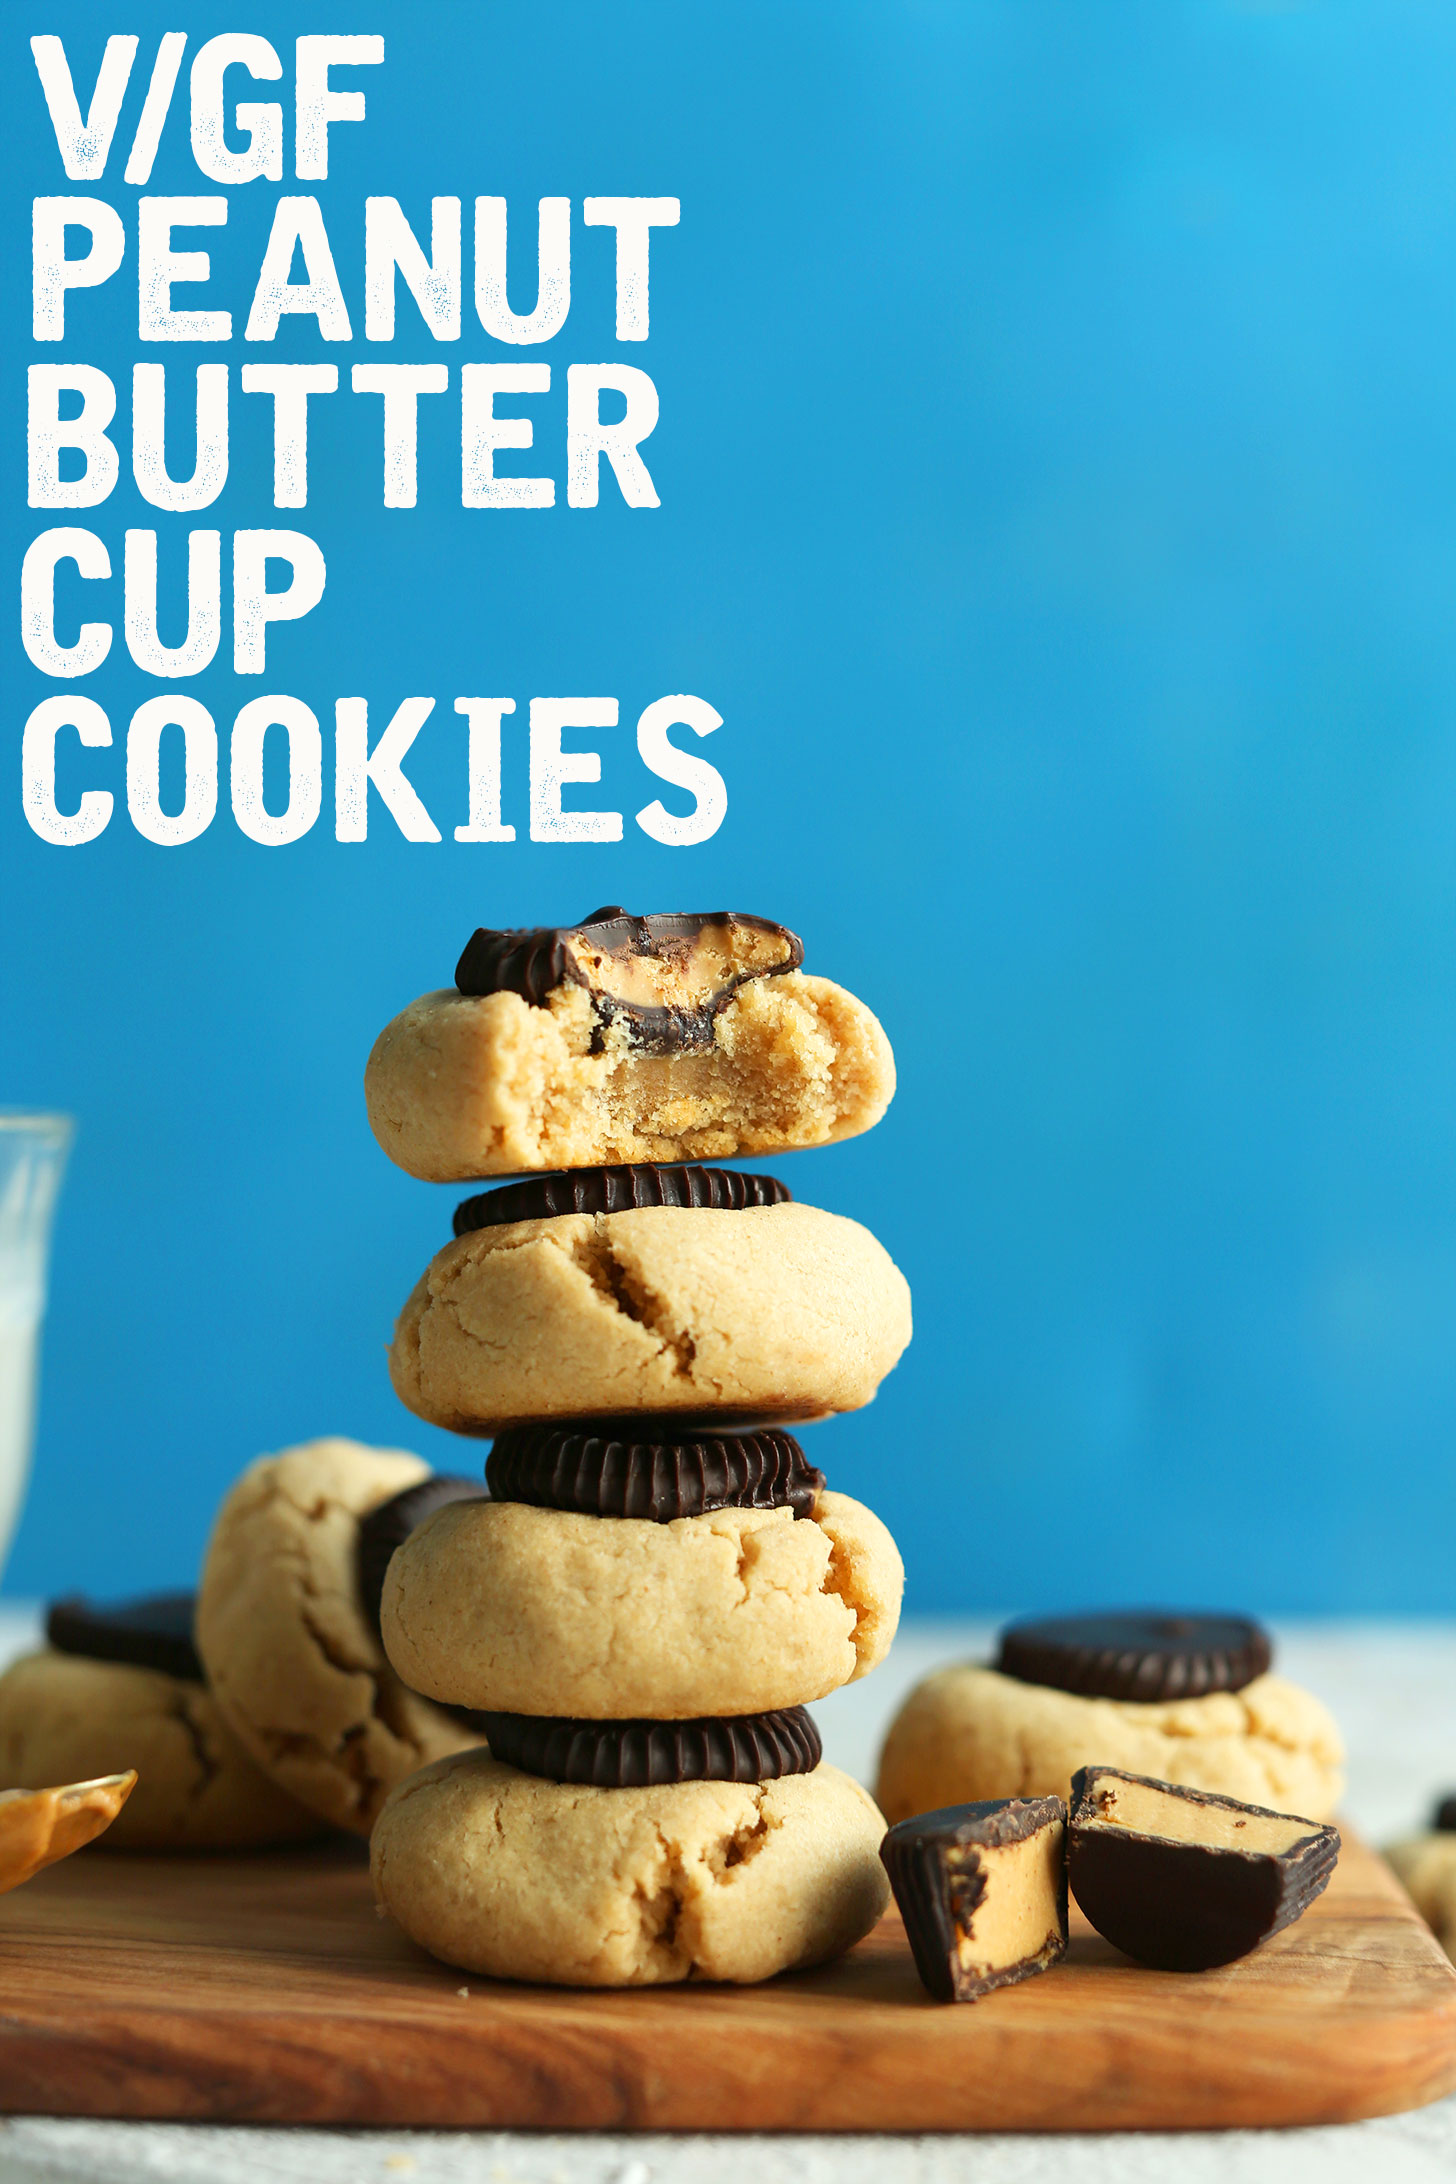 Stacked Peanut Butter Cup Cookies for a delicious gluten-free vegan dessert